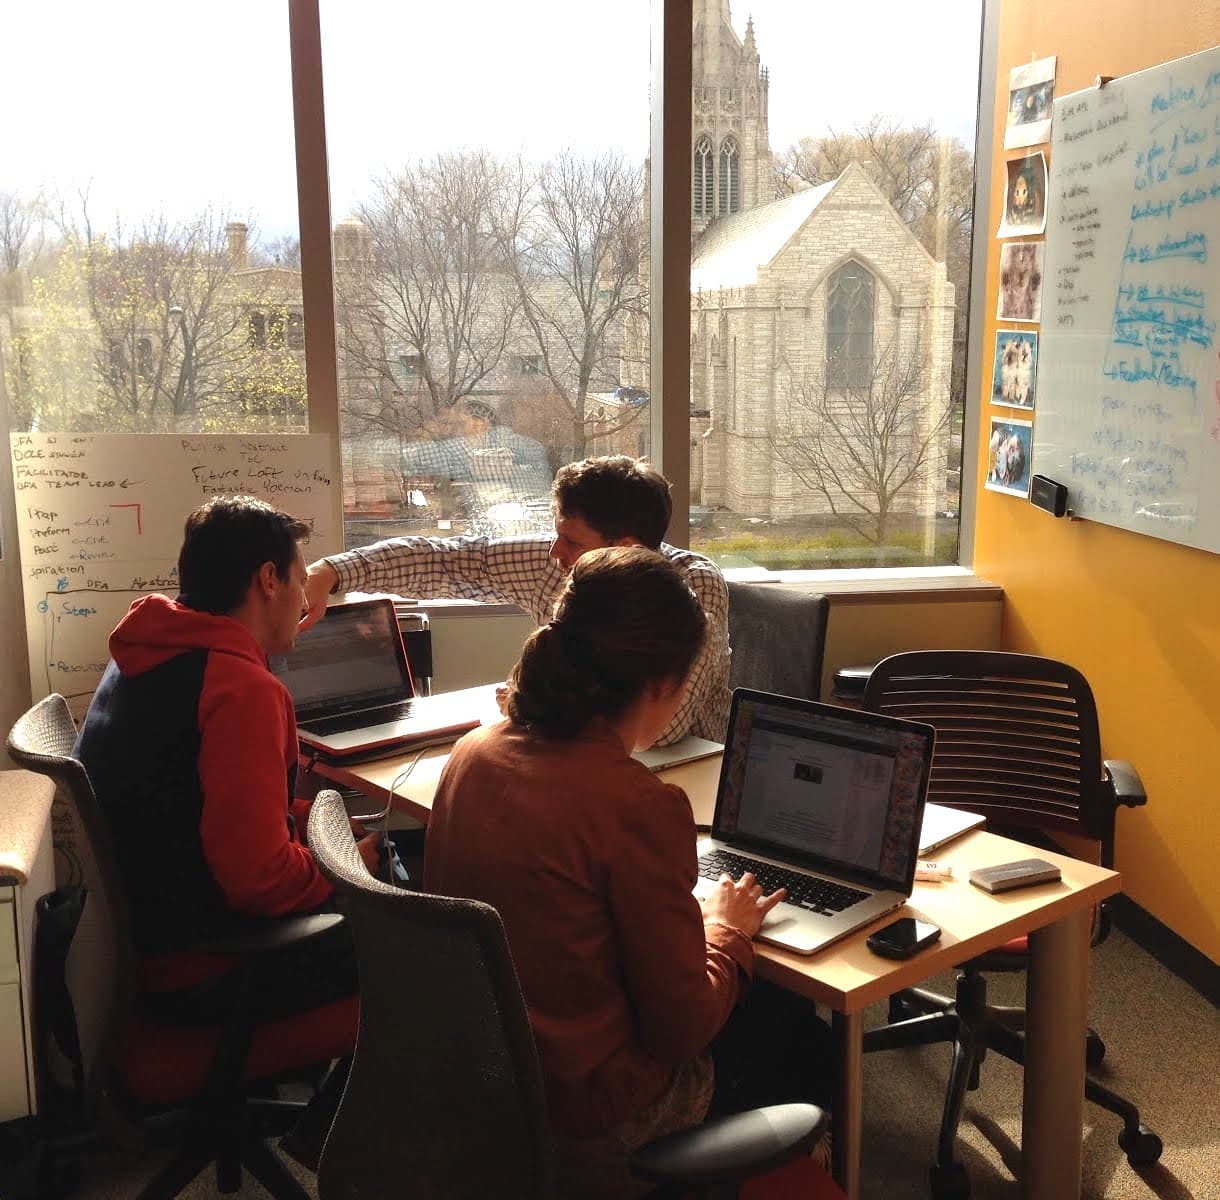 We train students to be self-directed designers, researchers, and mentors.